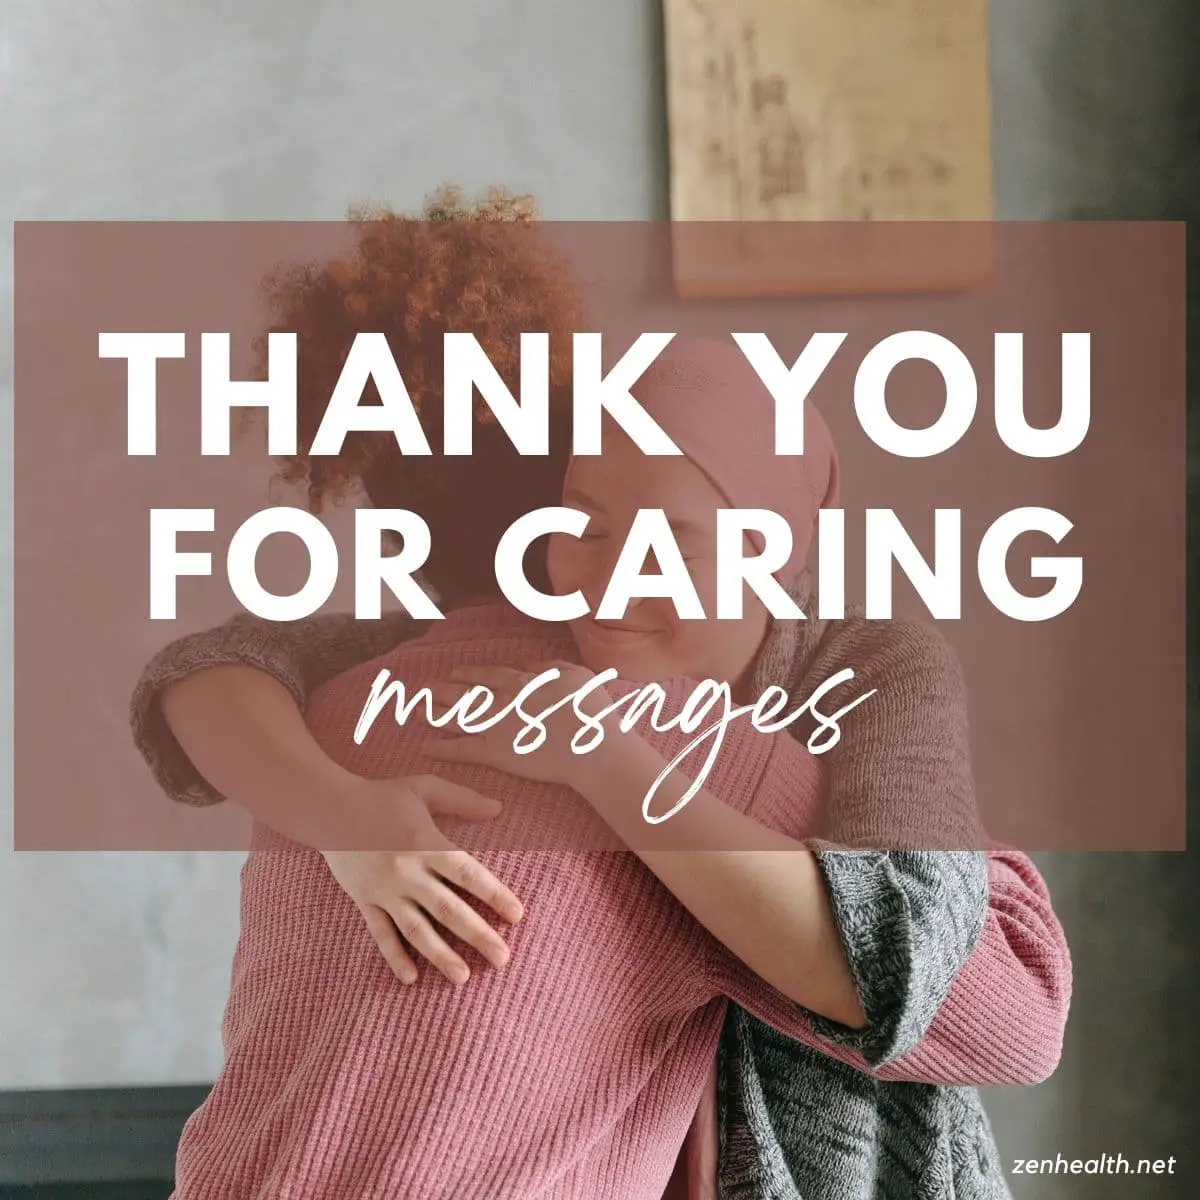 thank you for caring messages text overlaid on two women hugging